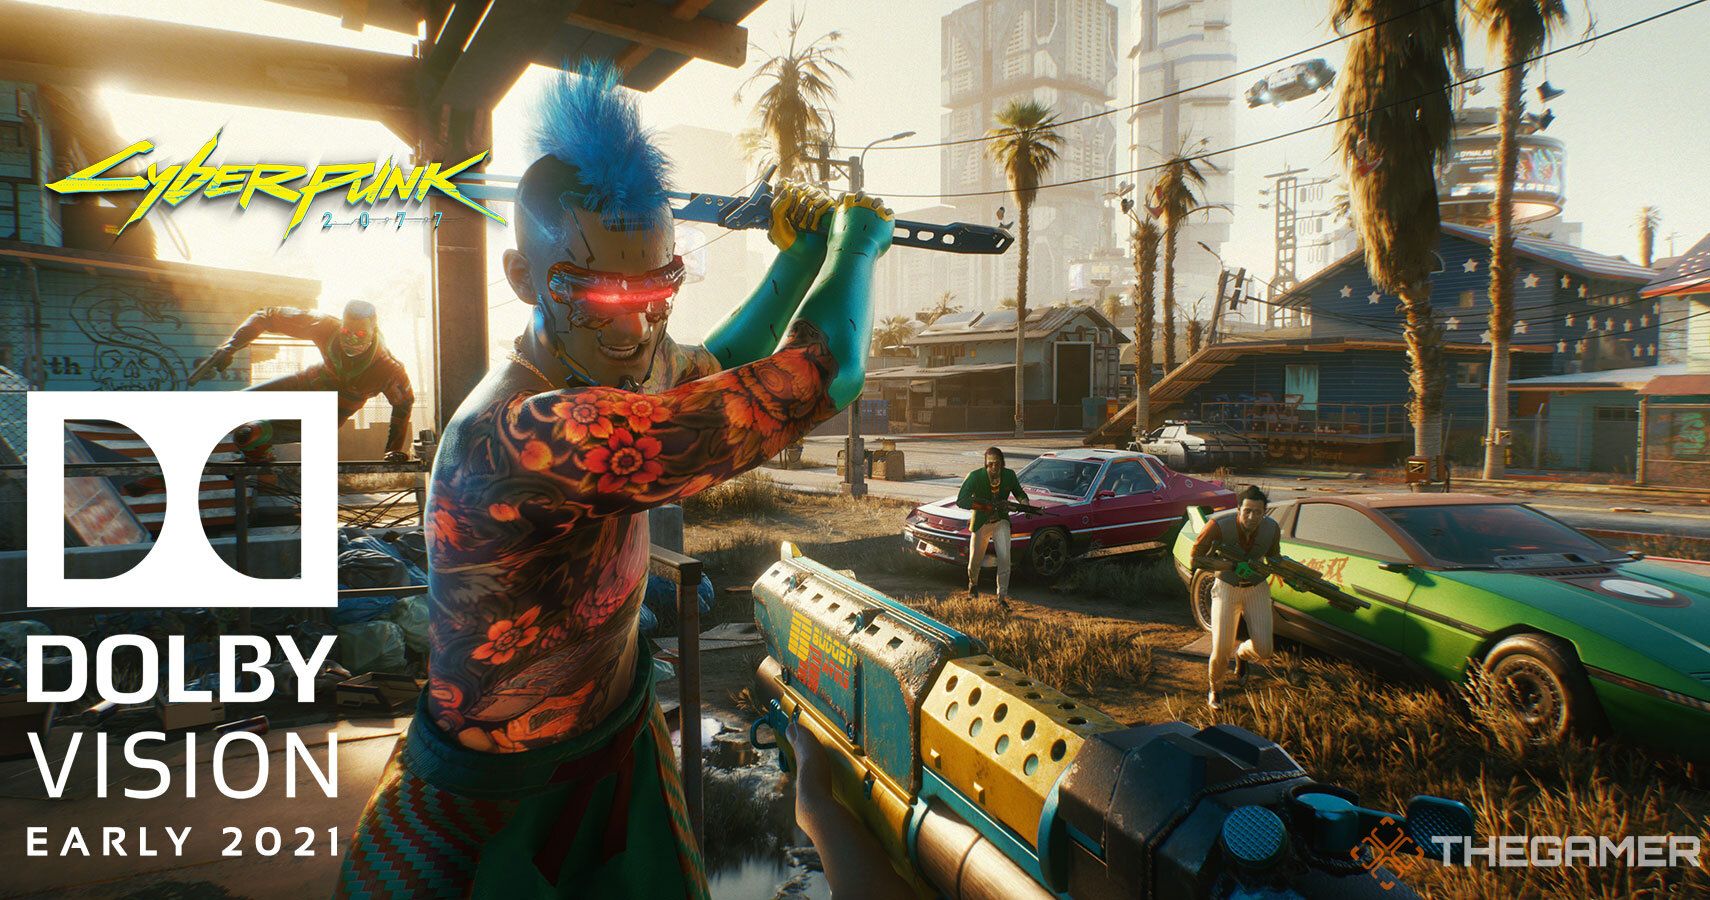 Cyberpunk 2077 Will Get Dolby Vision Support In Early 2021